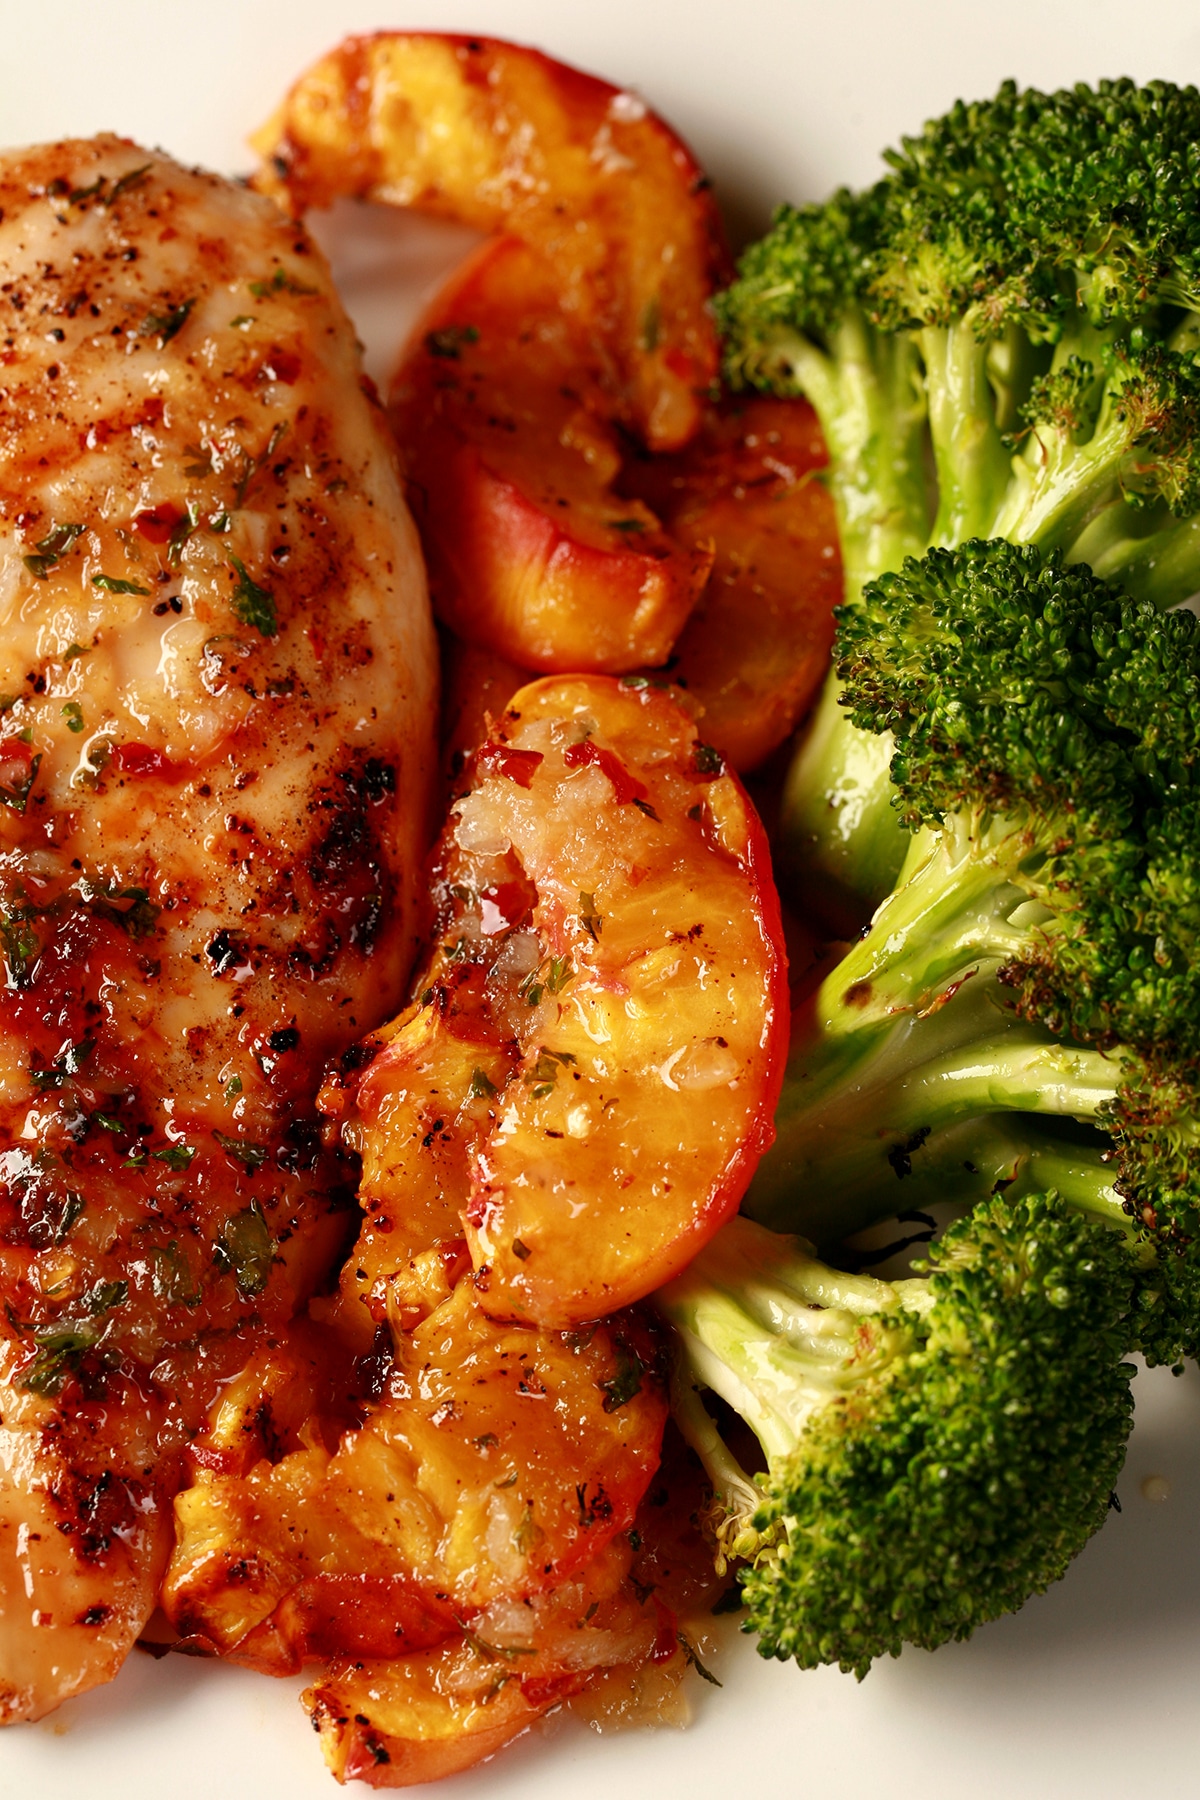 Image of a plate of food: 1 grilled chicken breast - visibly seasoned - grilled peach slices, and broccoli